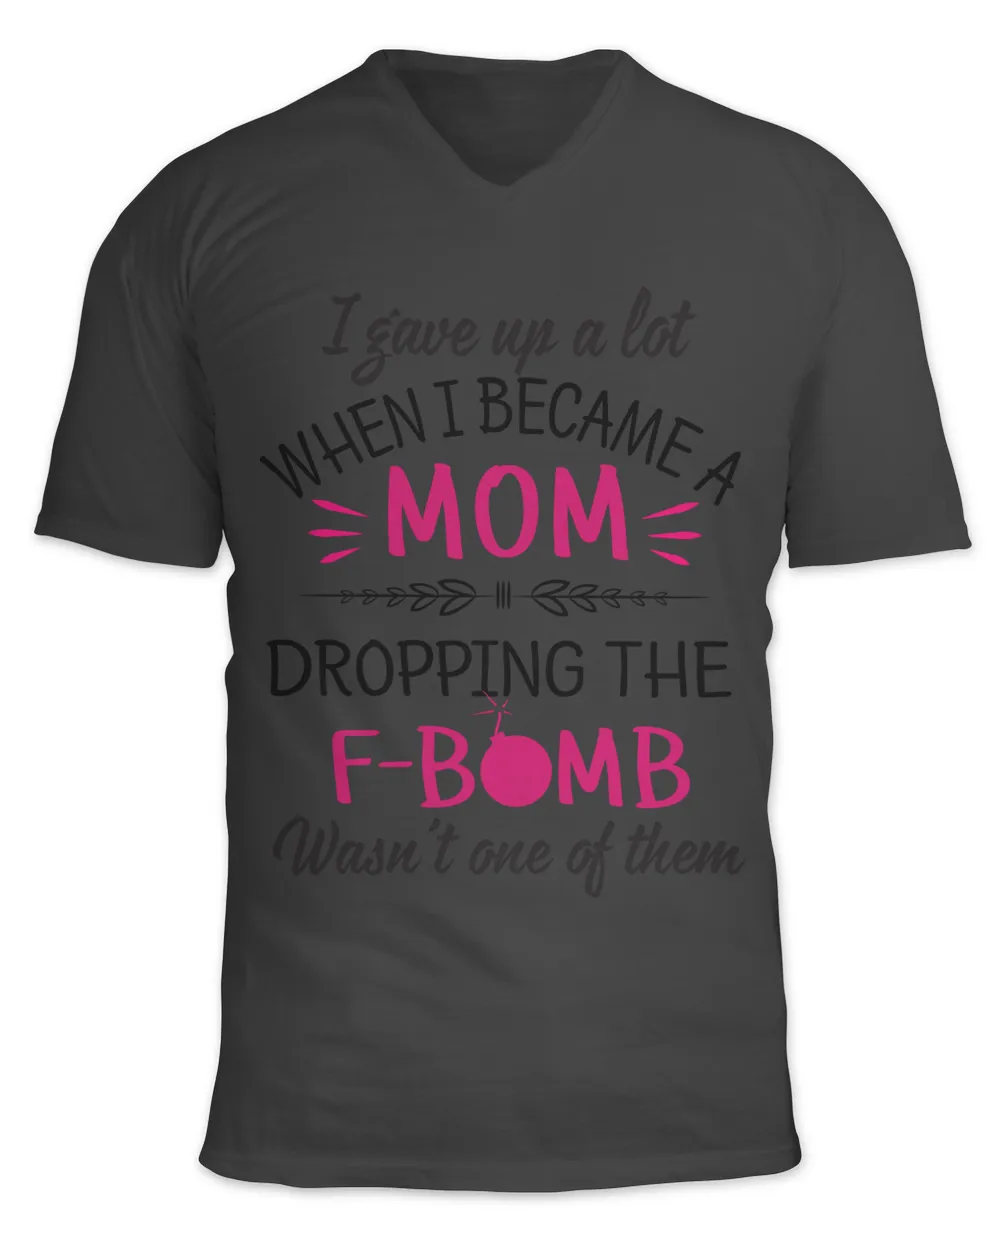 I gave up a lot when I became a mom dropping the f-bomb wasn't one of them